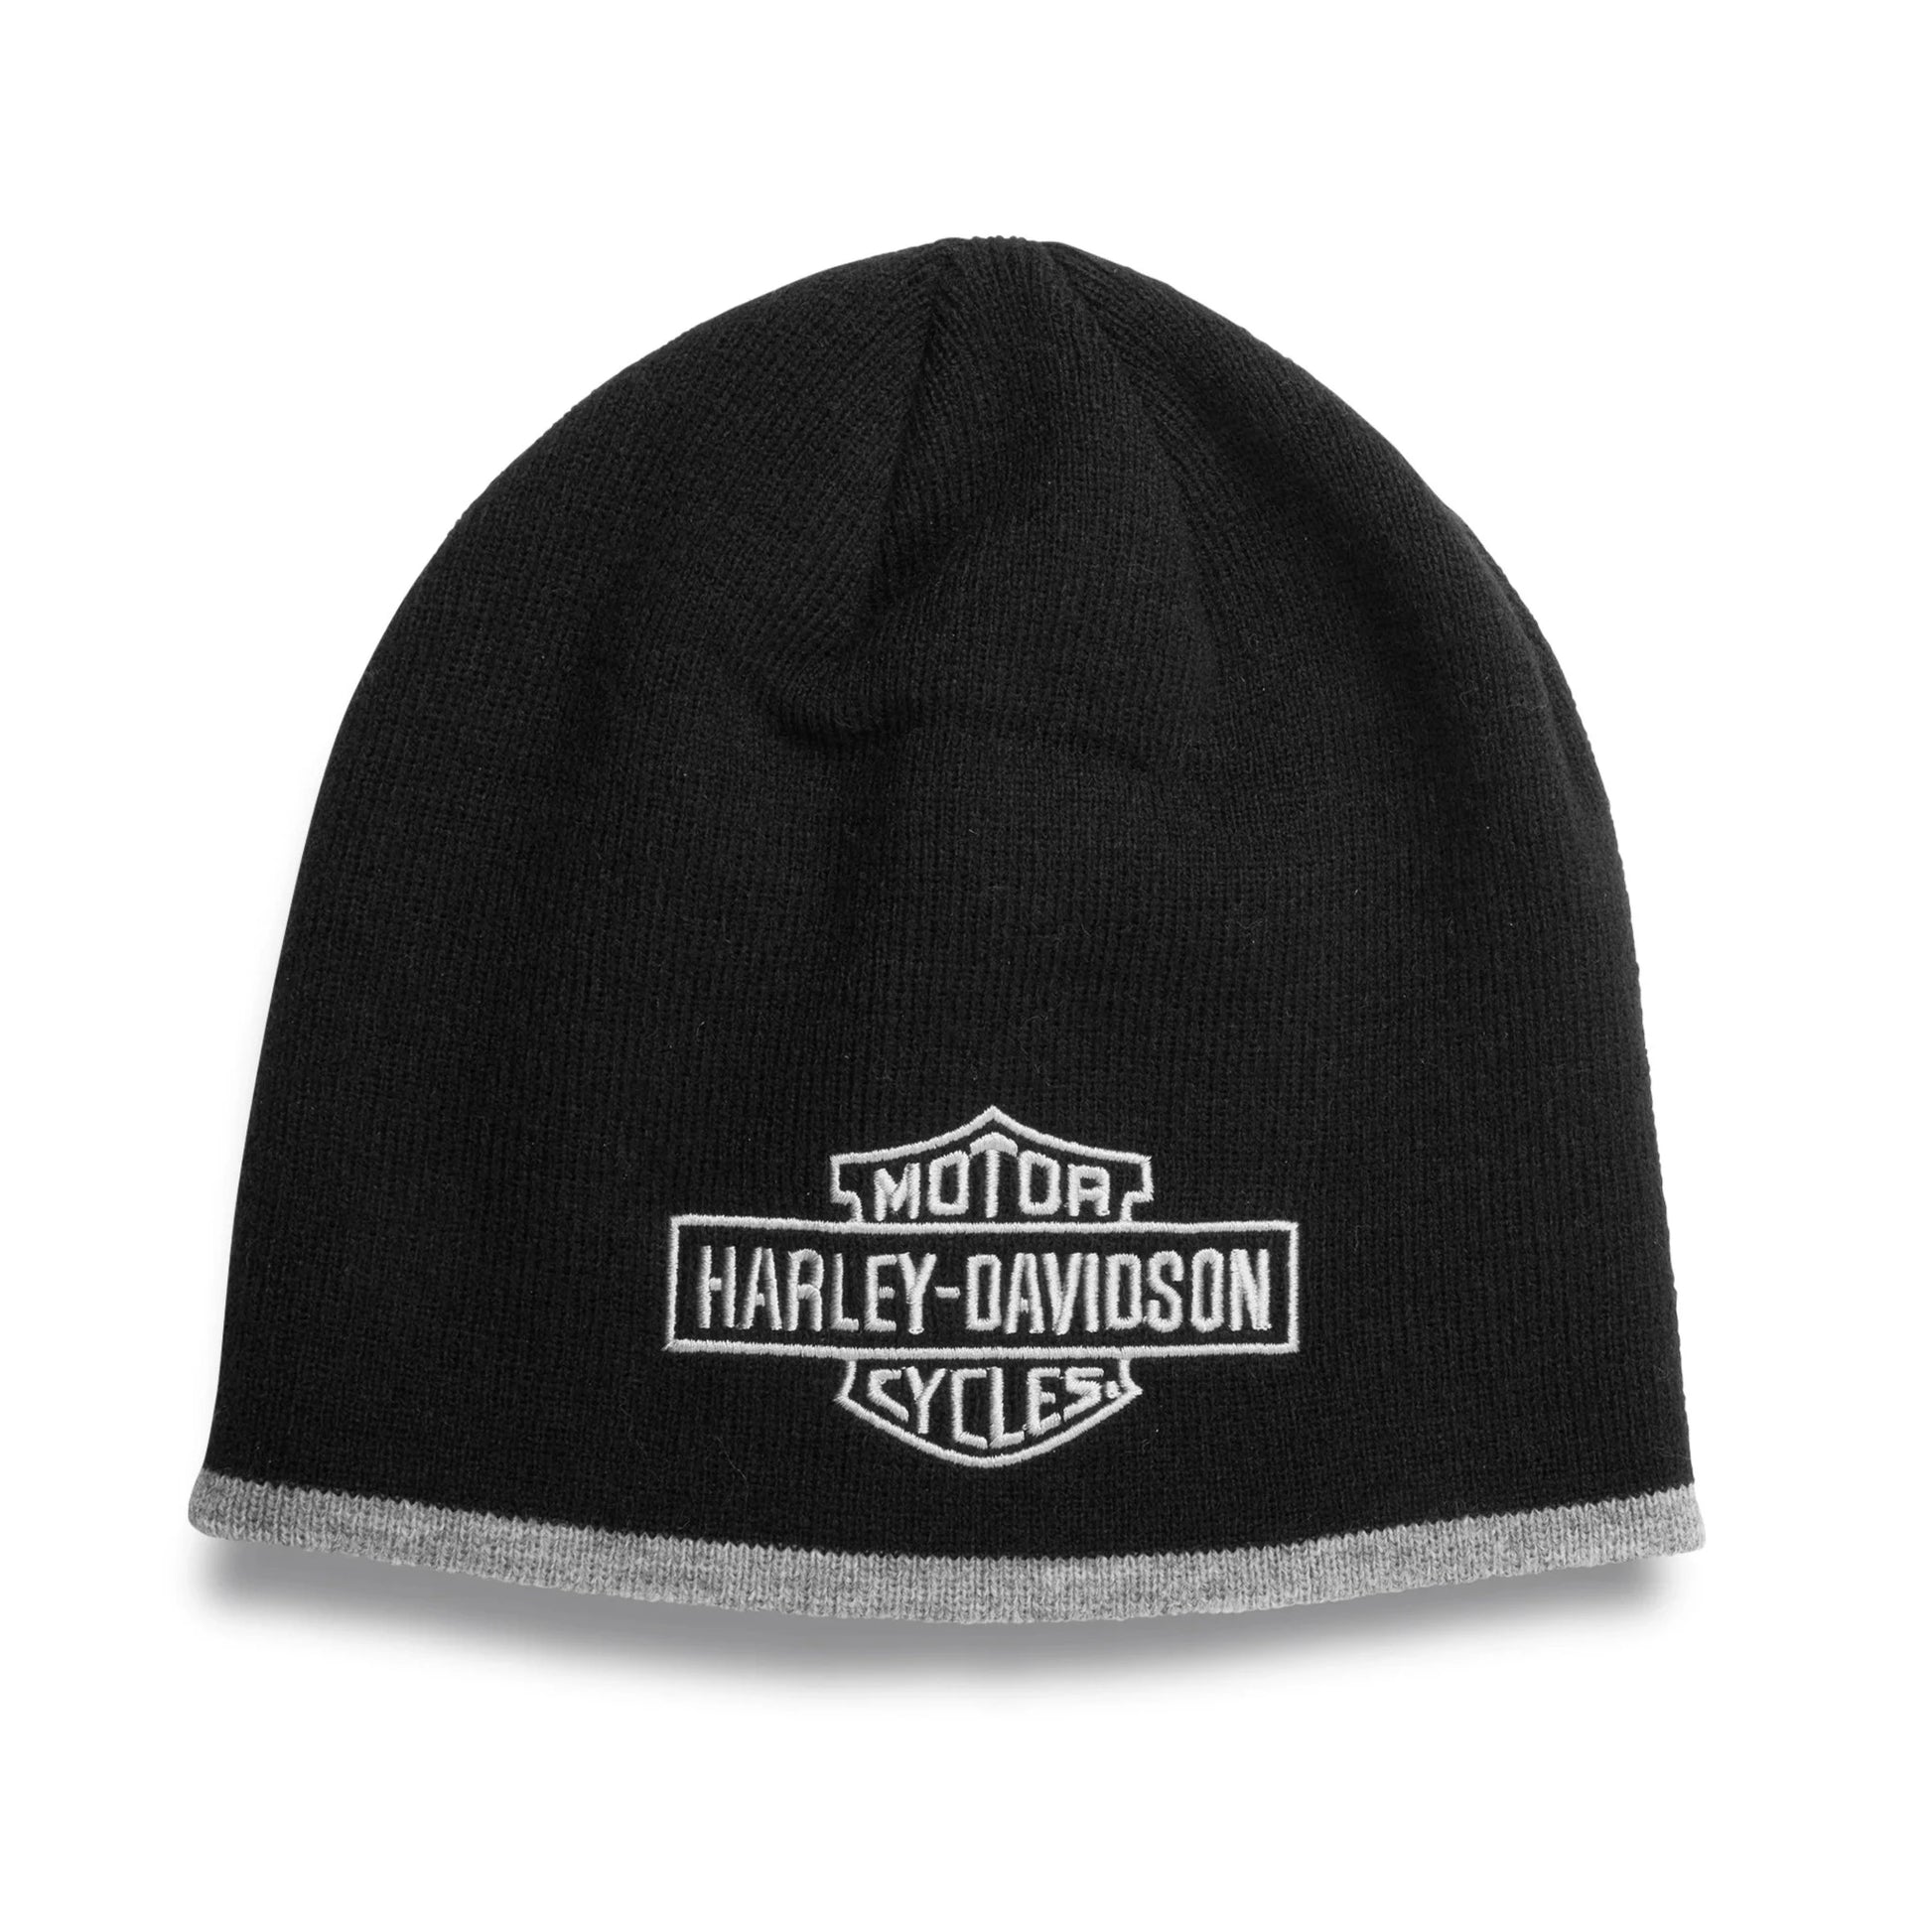 Harley-Davidson Men's Two-Tone Knit Hat Beanie - Black with grey trim and grey logo on front, 97621-22VM